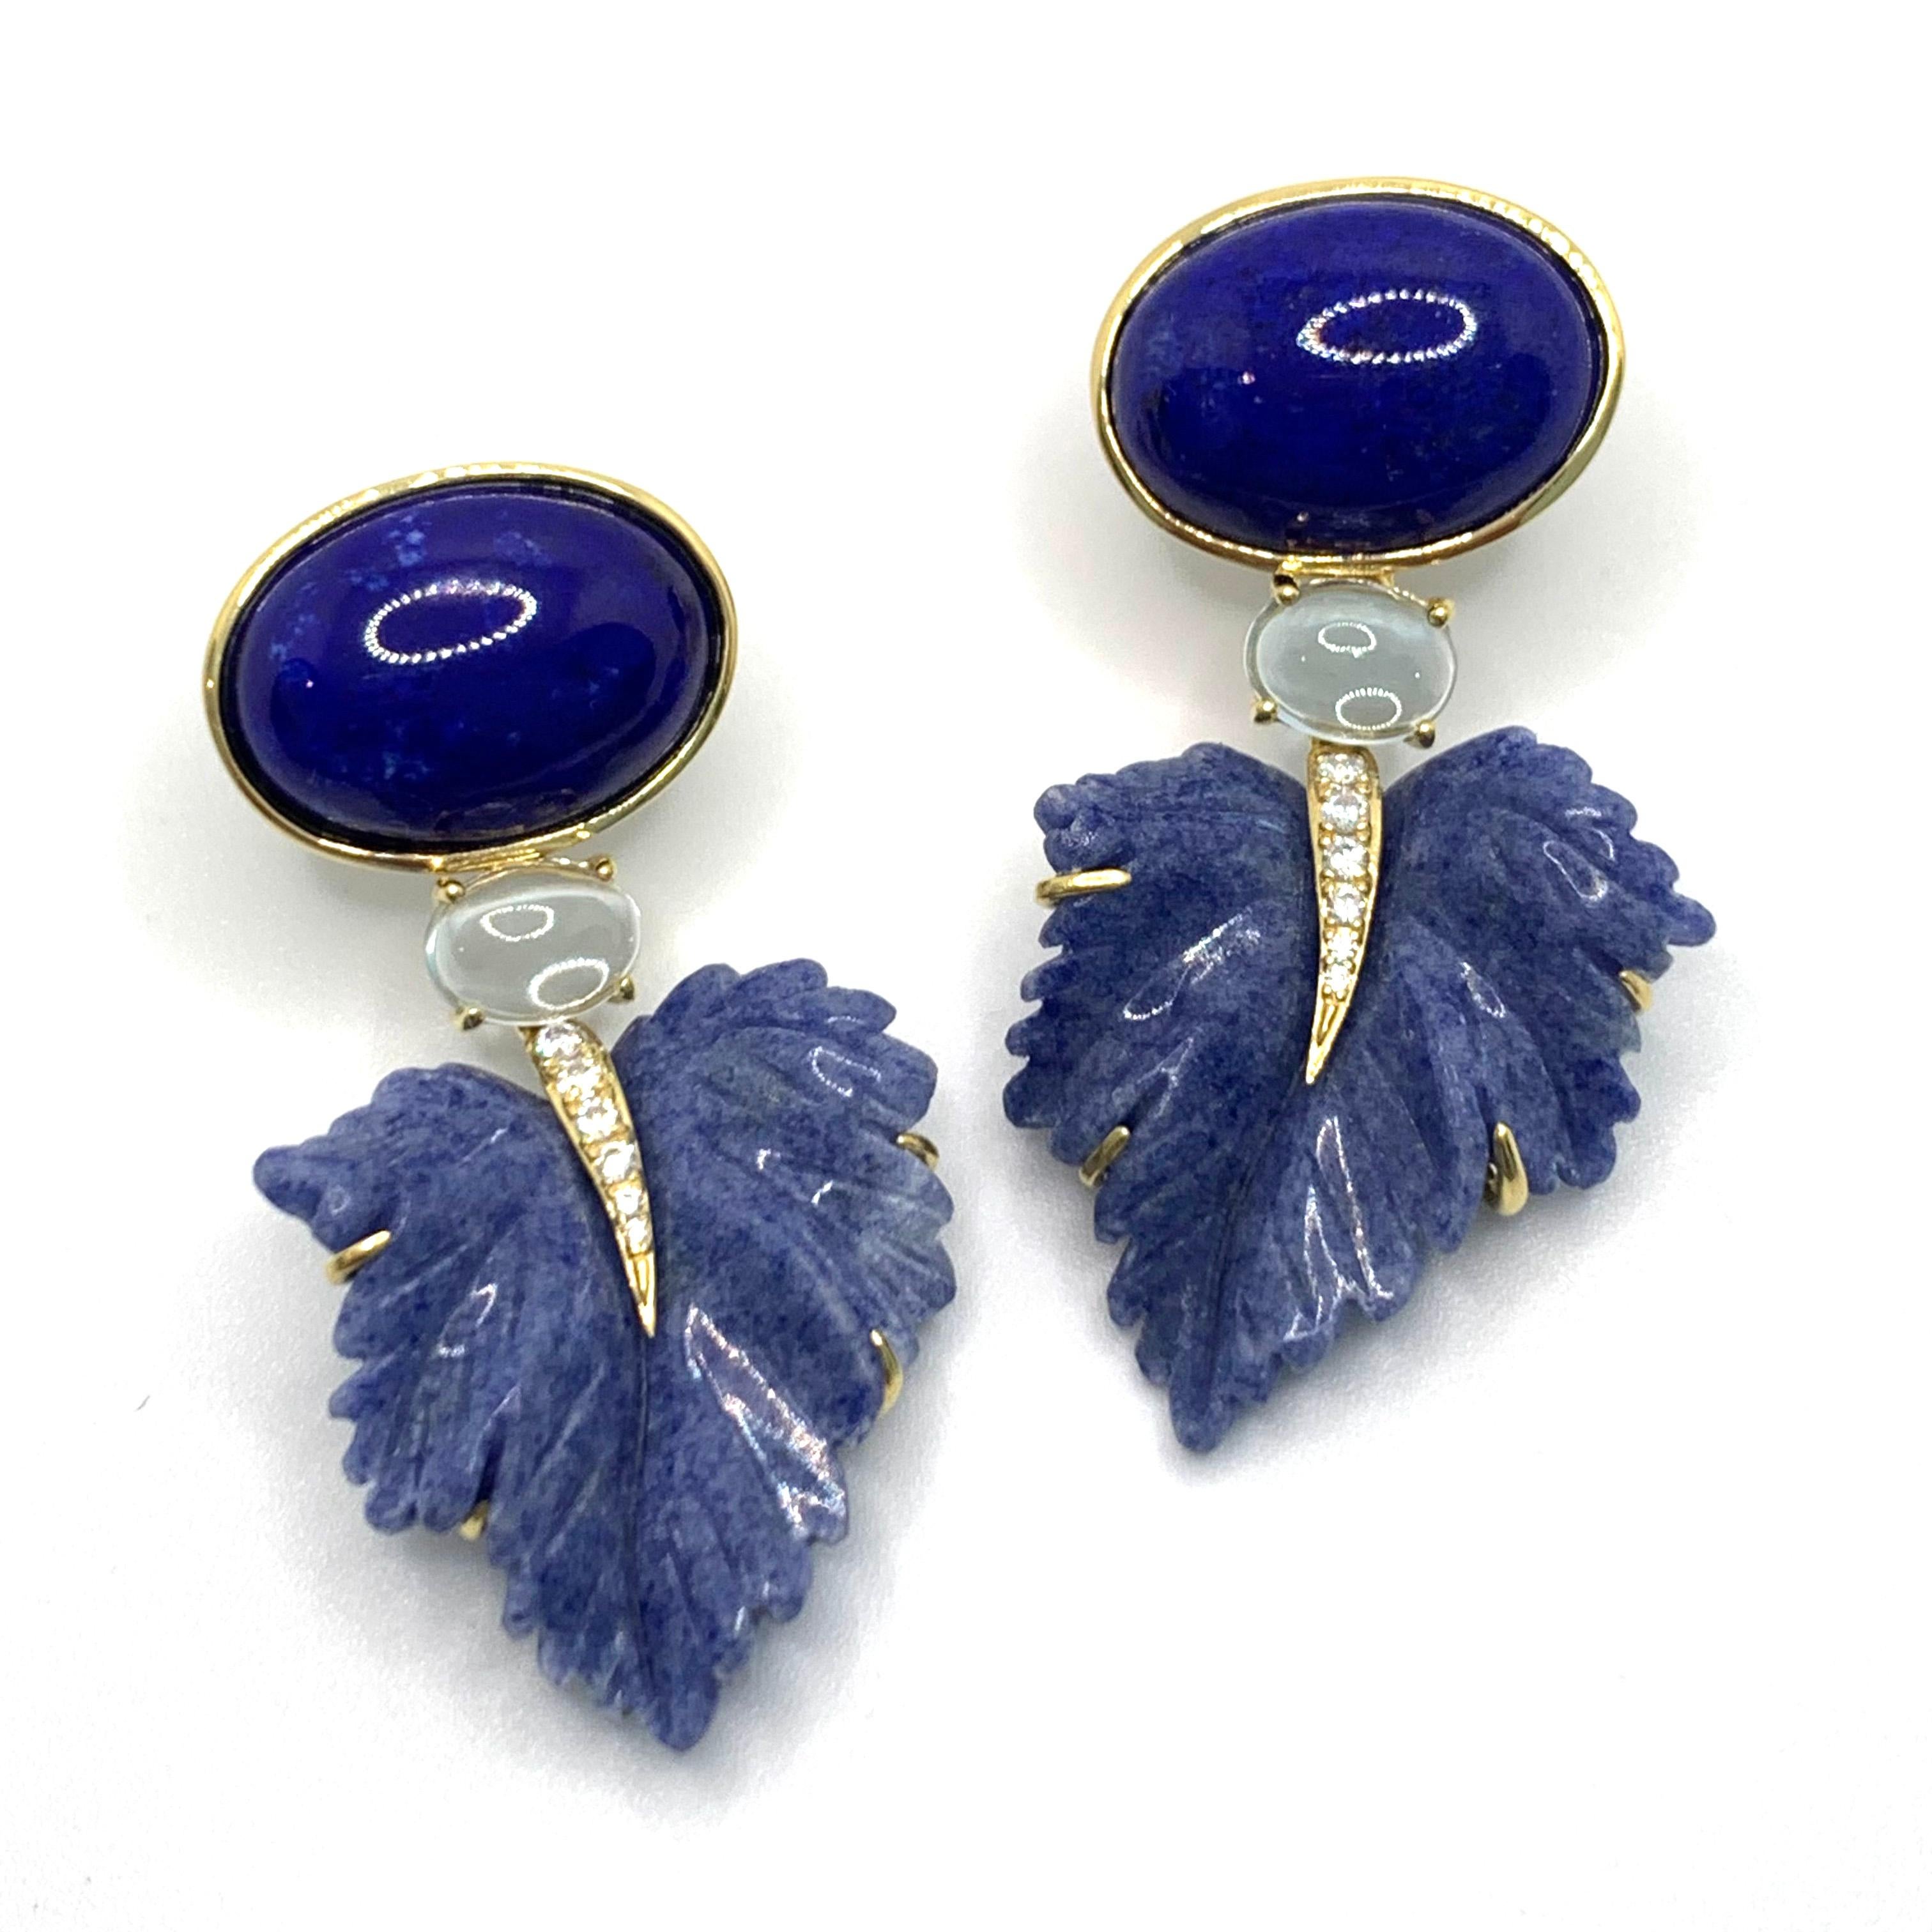 Artisan Stunning Cabochon Lapis, Carved Blue Dumortierite Leaf Earrings